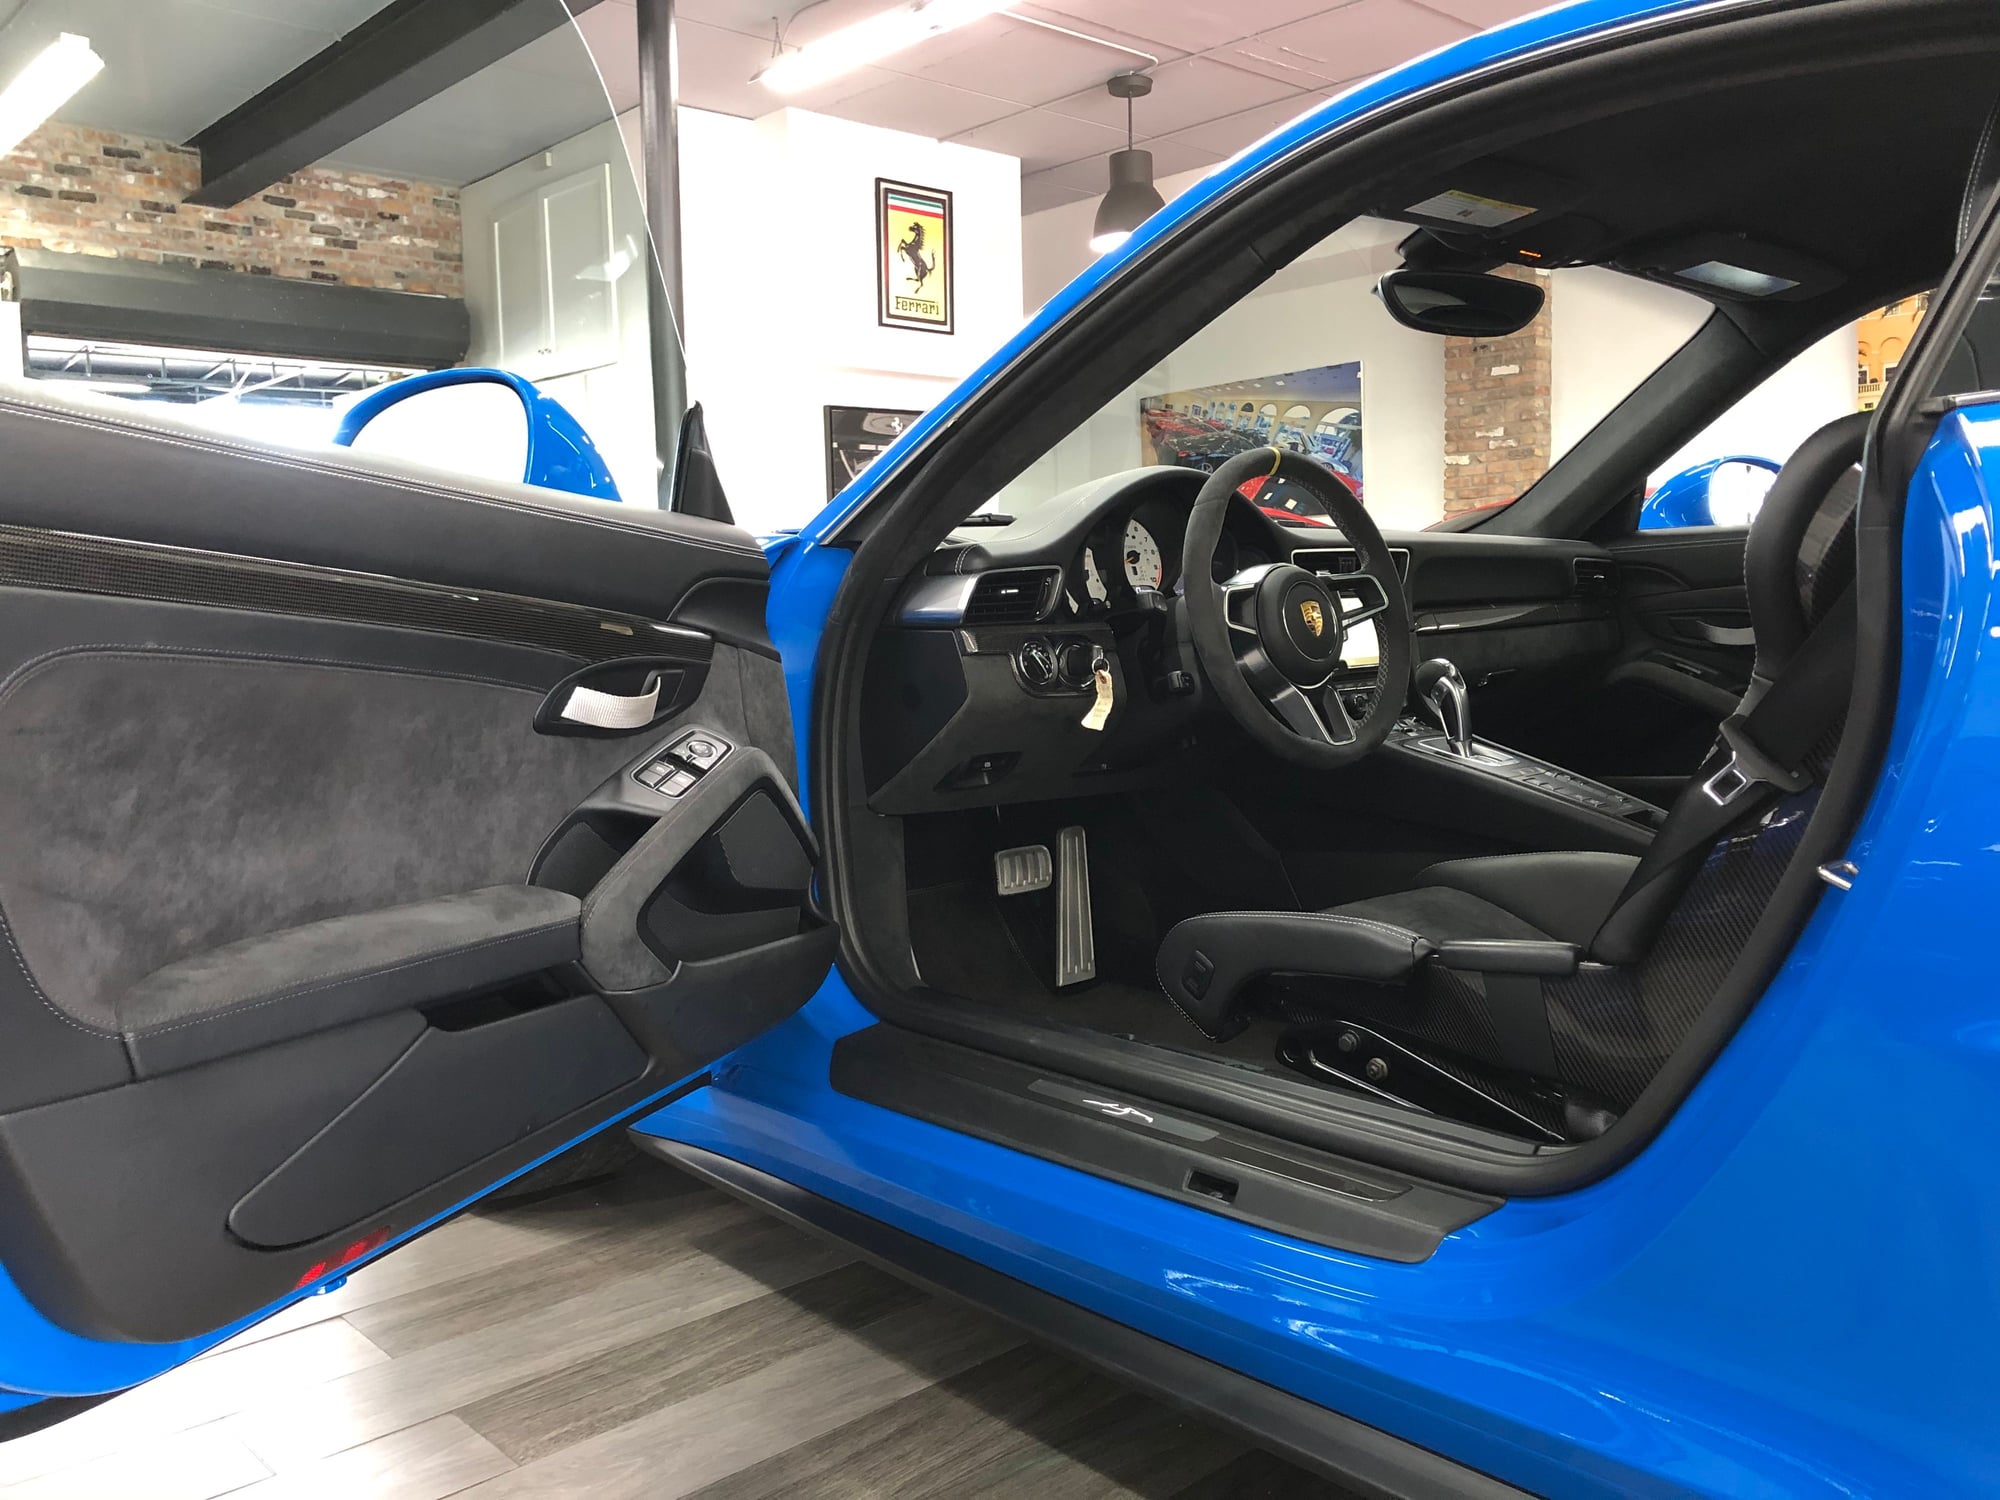 2016 Porsche GT3 - 2016 PORSCHE 911 GT3 RS Voodoo Blue - Used - VIN WP0AF2A95GS192588 - 1,239 Miles - 6 cyl - 2WD - Automatic - Coupe - Blue - Miami, FL 33146, United States